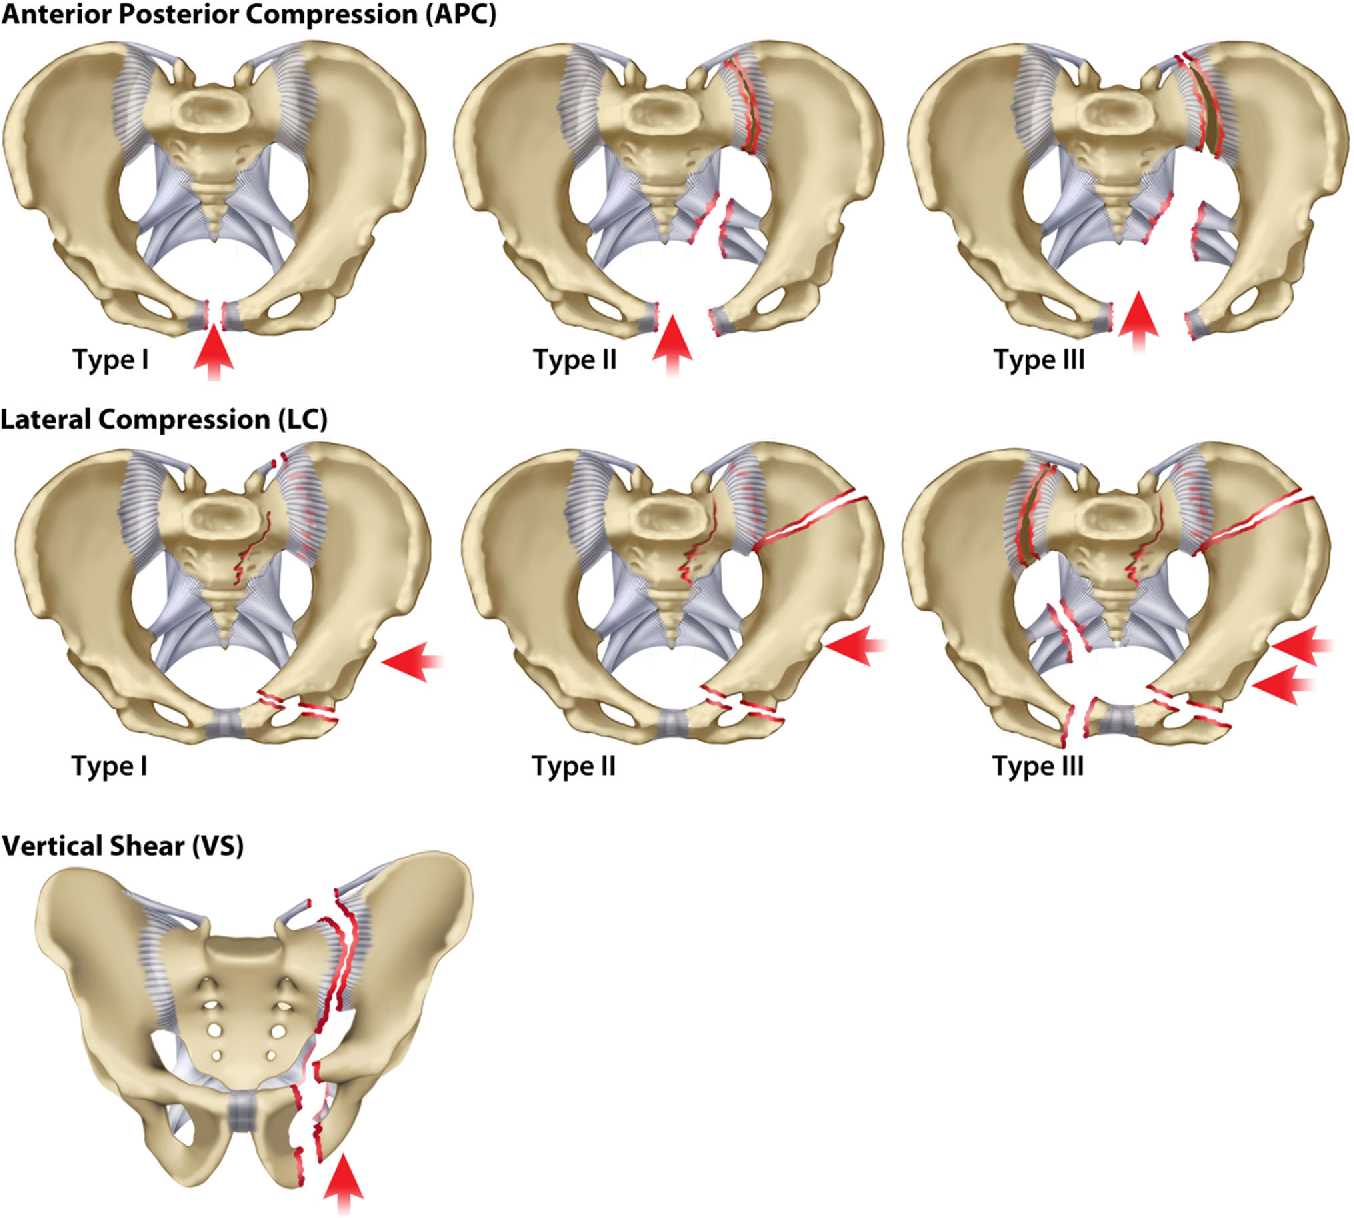 Pelvic Fractures | Concise Medical Knowledge